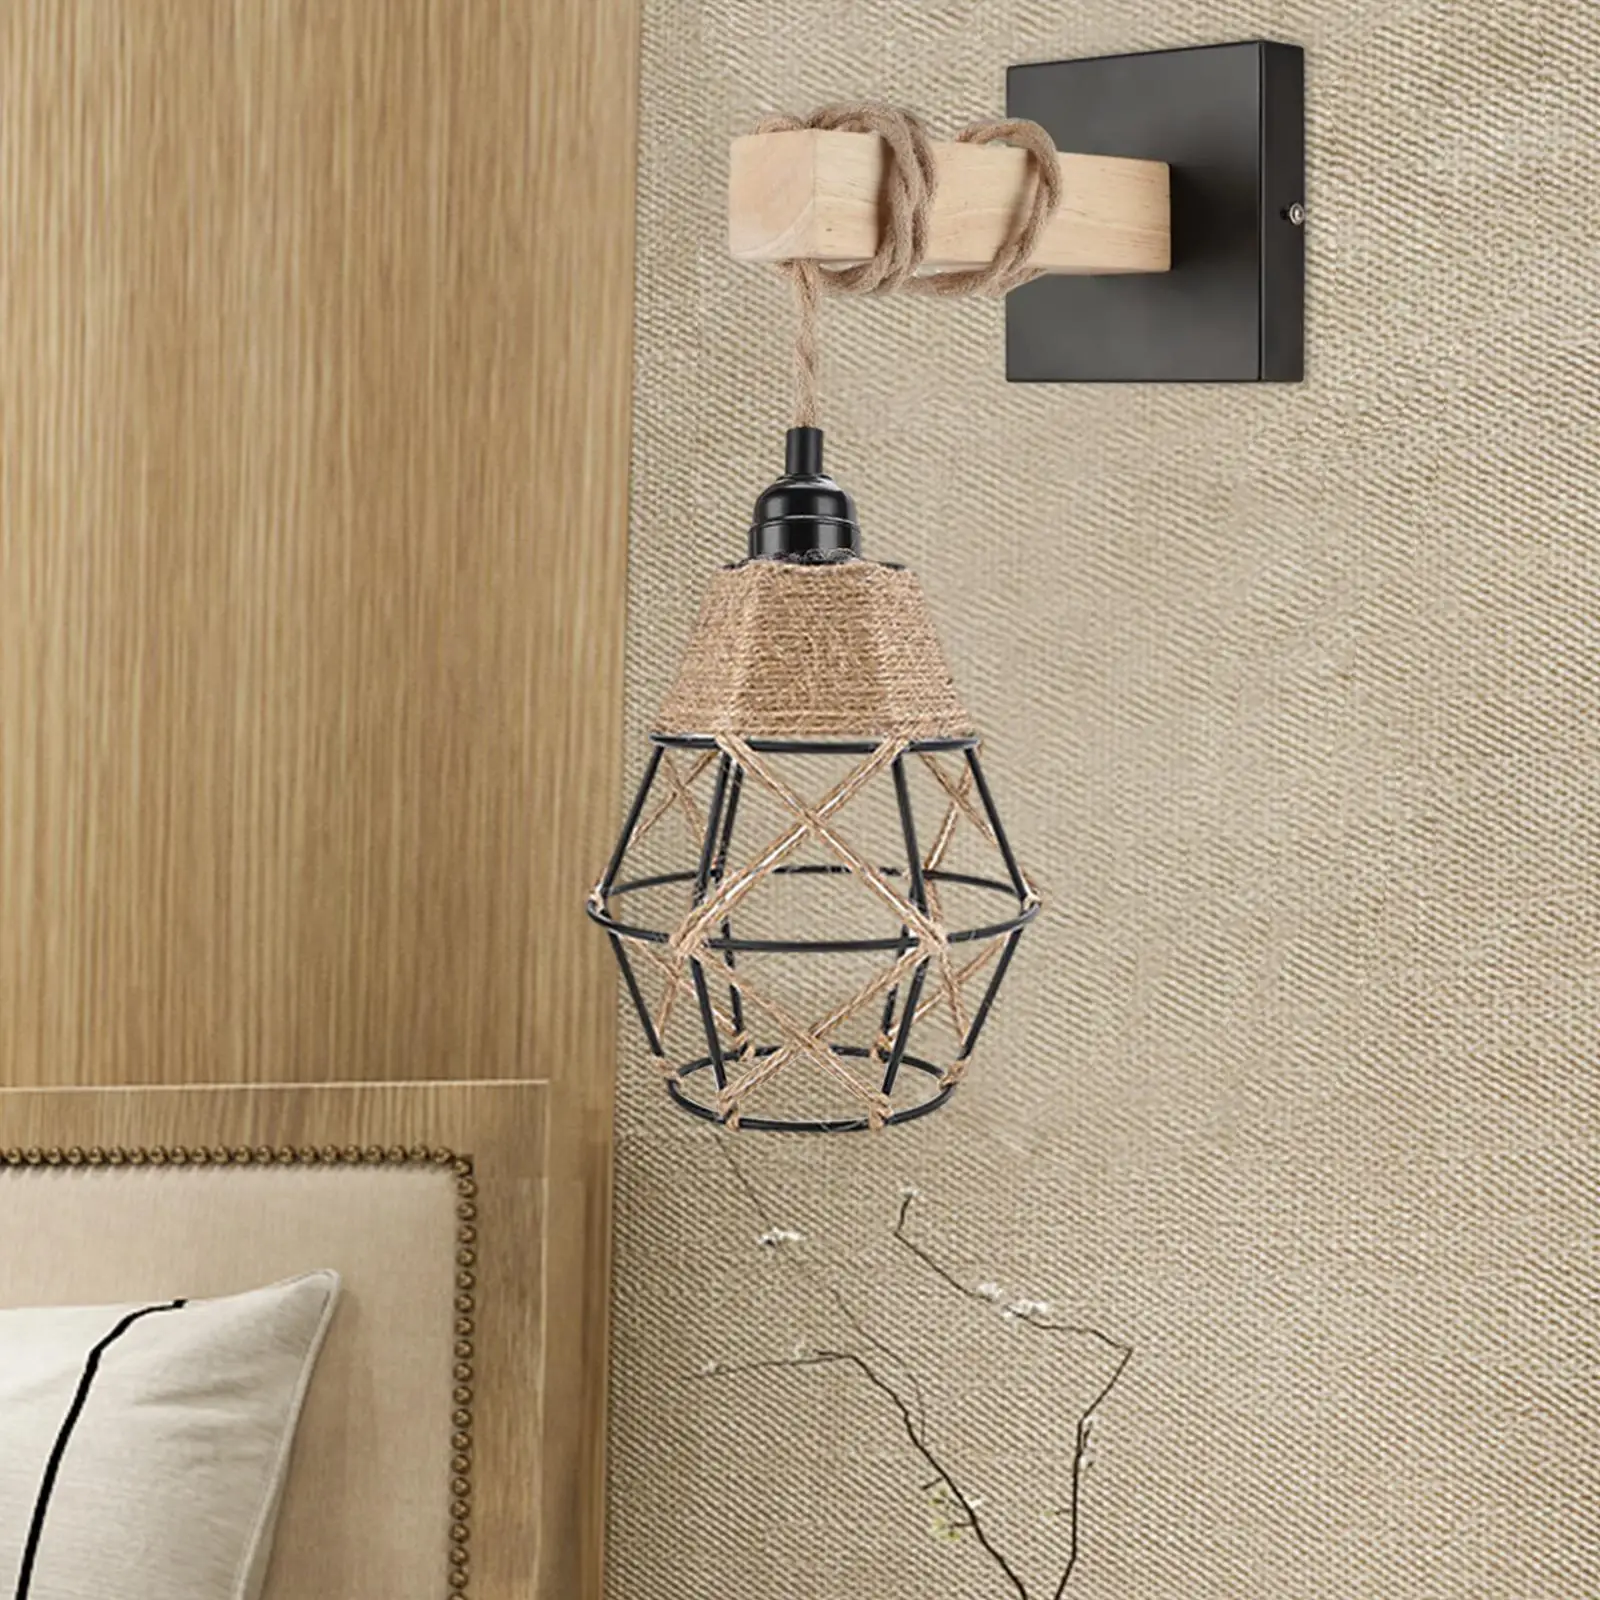 Wall Sconce Hanging Lamp Wall Mount Lamp Retro Wall Mount Sconce Lighting for Living Room Bedroom Home Reading Decor